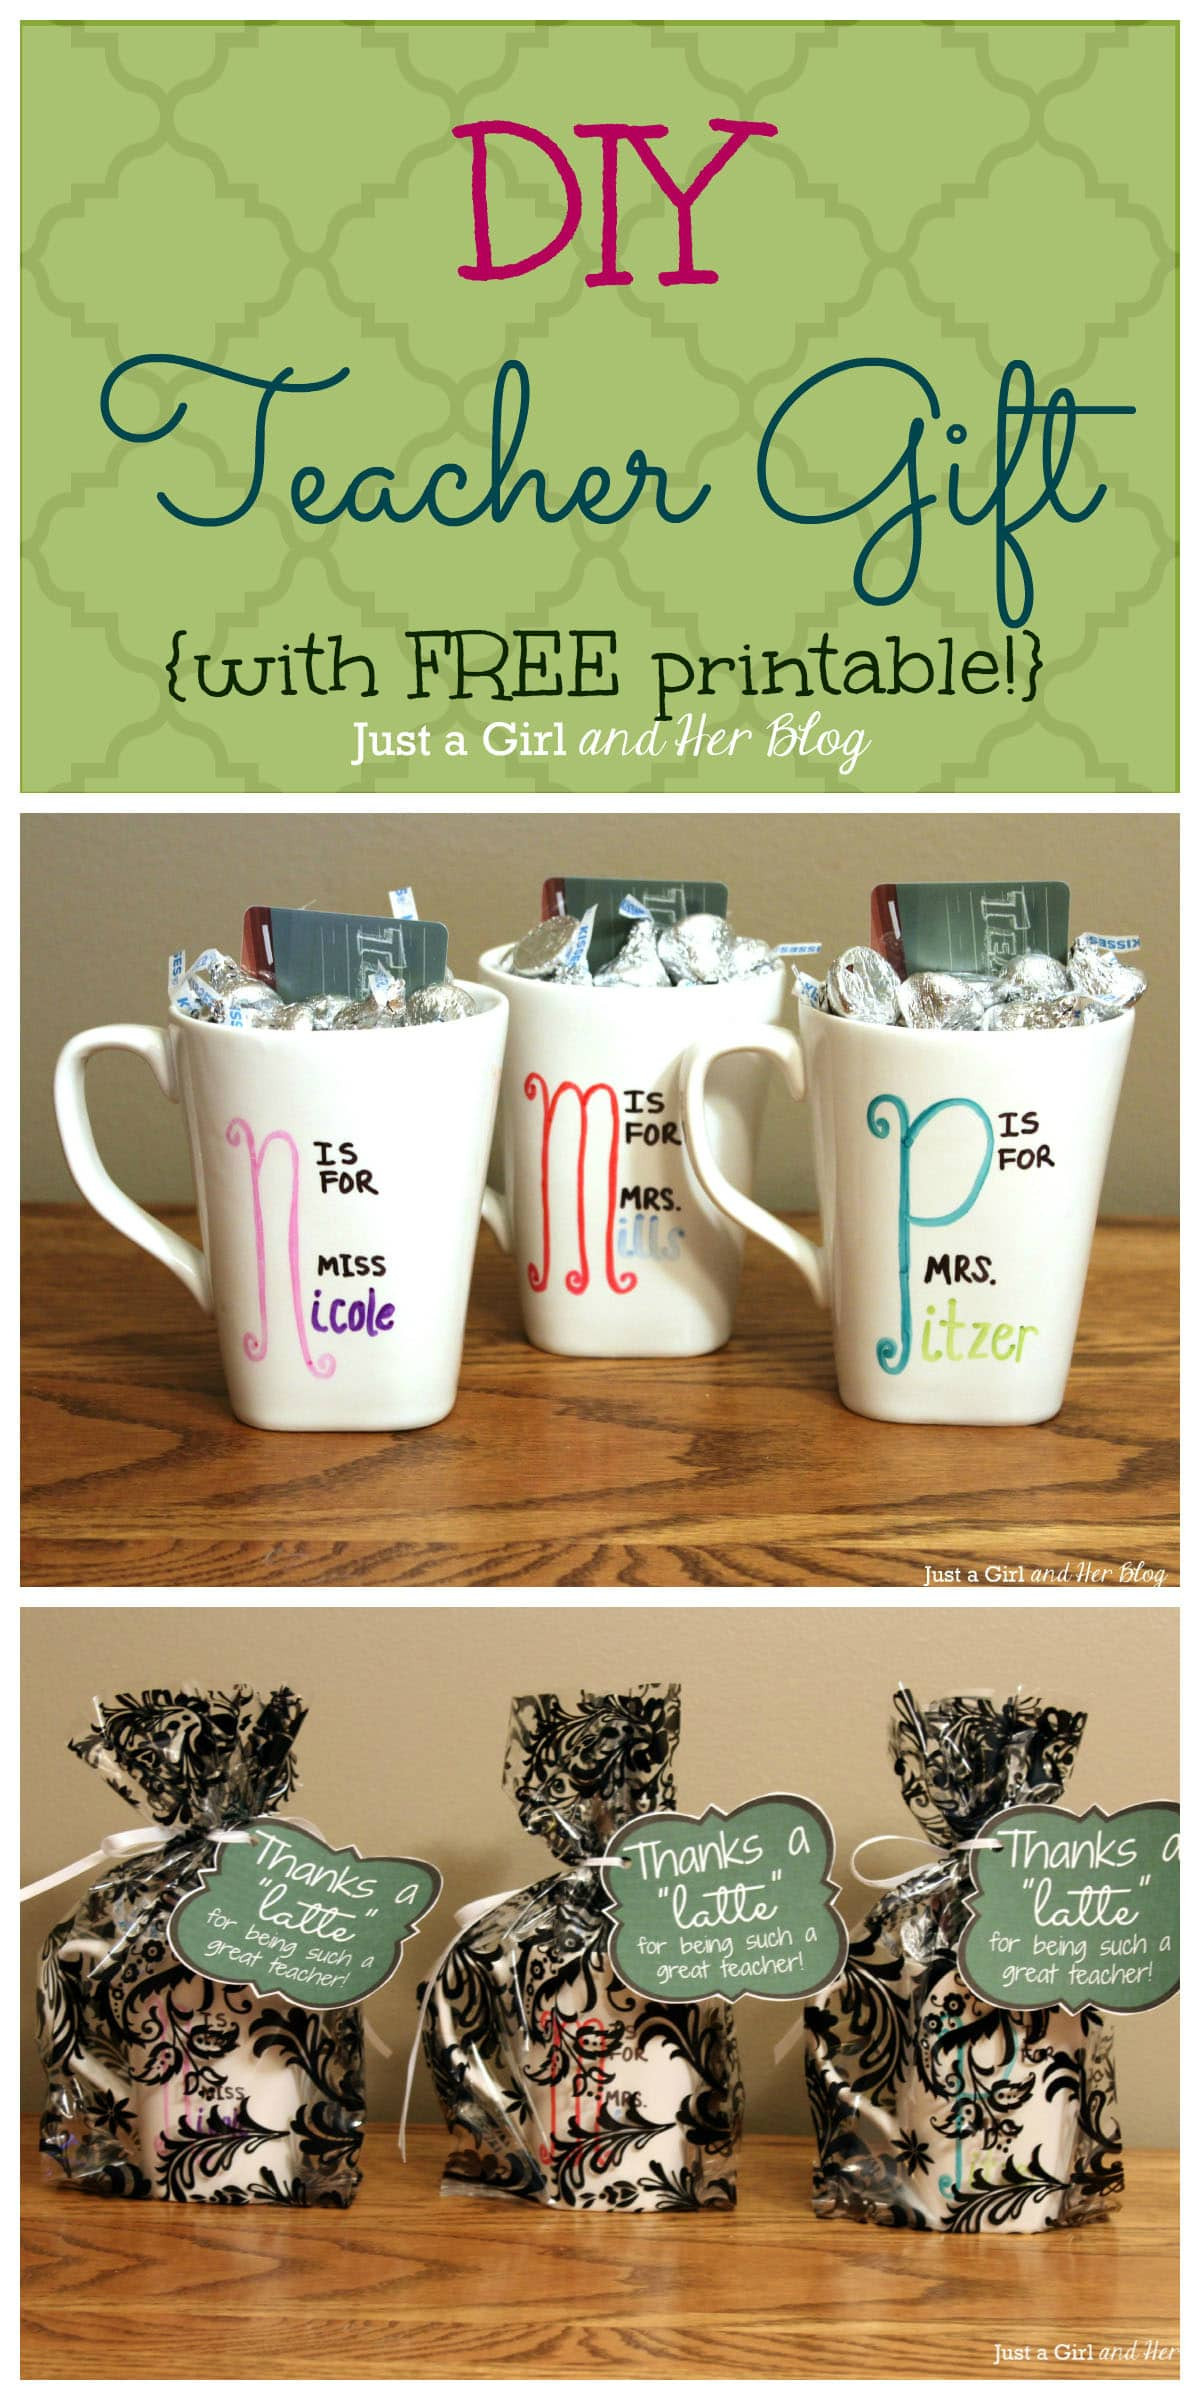 DIY Gifts For Teachers
 DIY Teacher Gift with FREE Printable